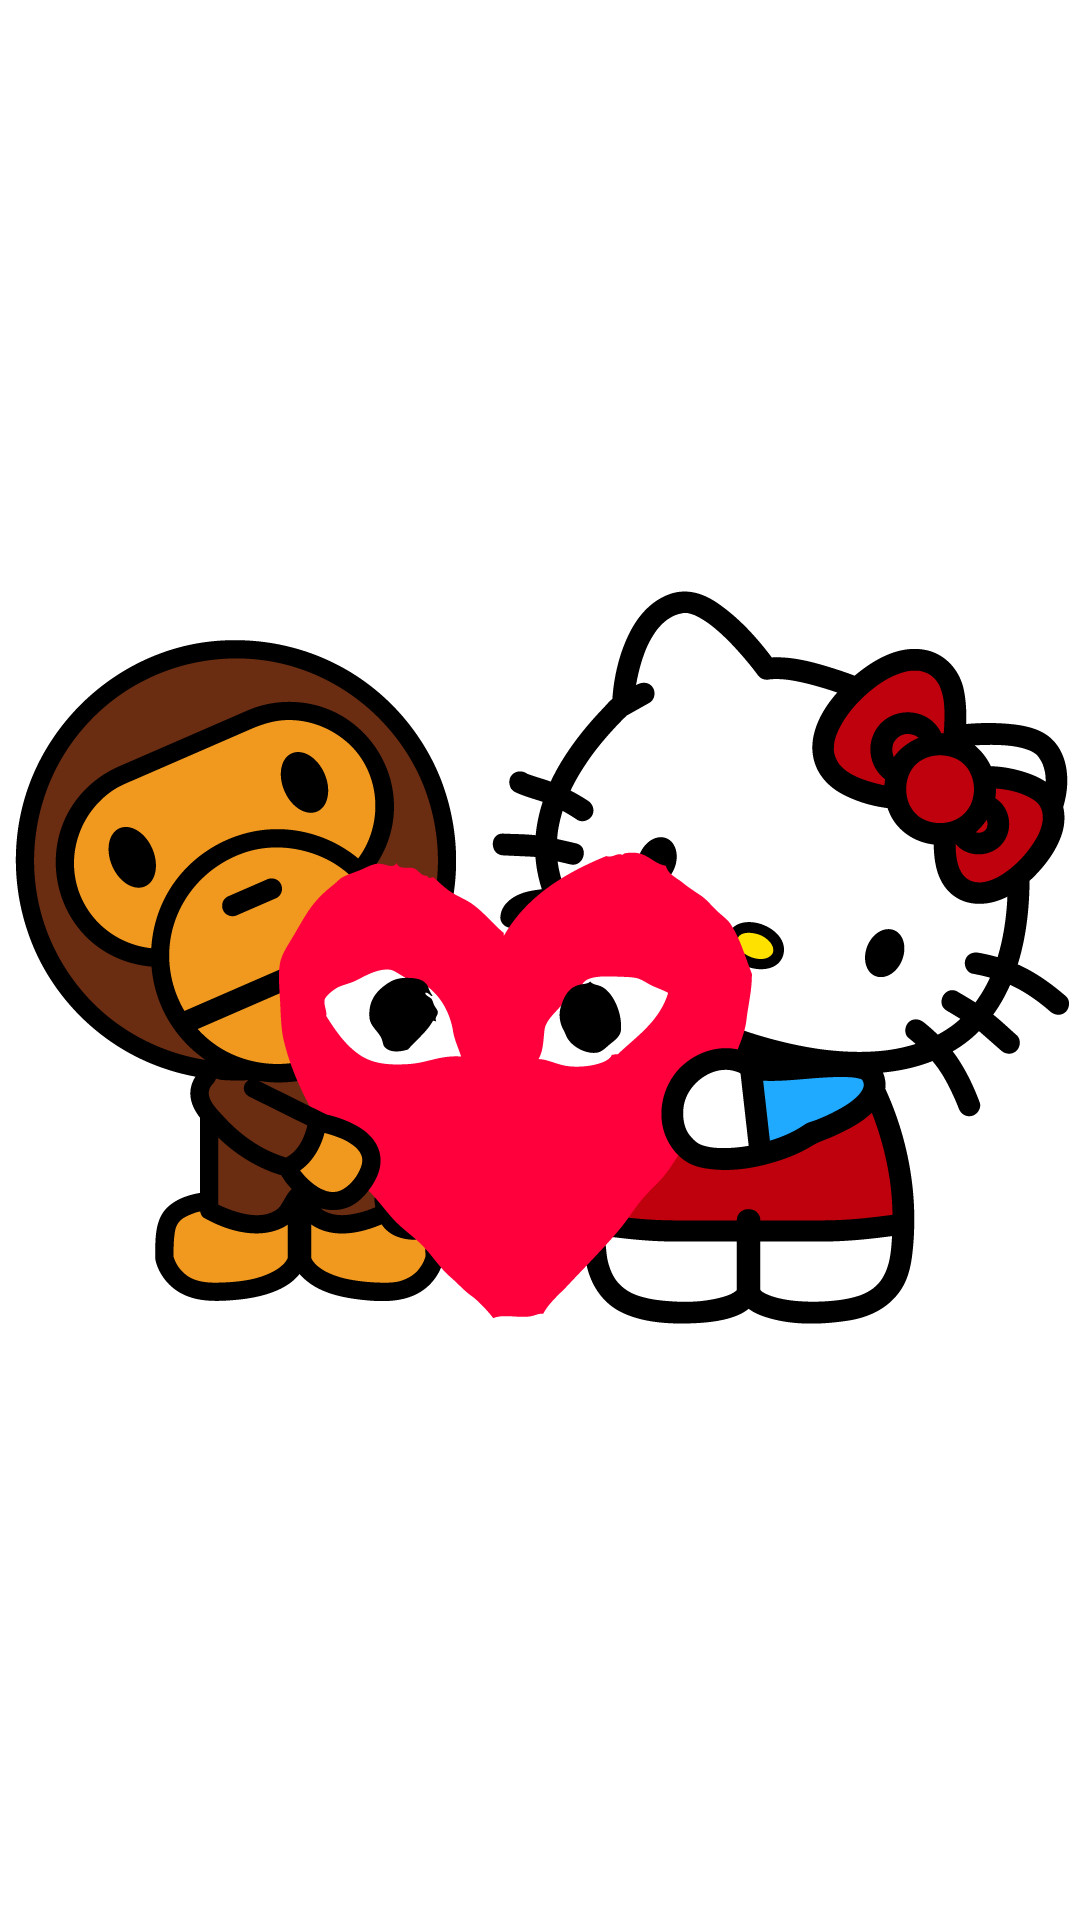 Download Download - Hello Kitty Bape Sticker On Itl.cat